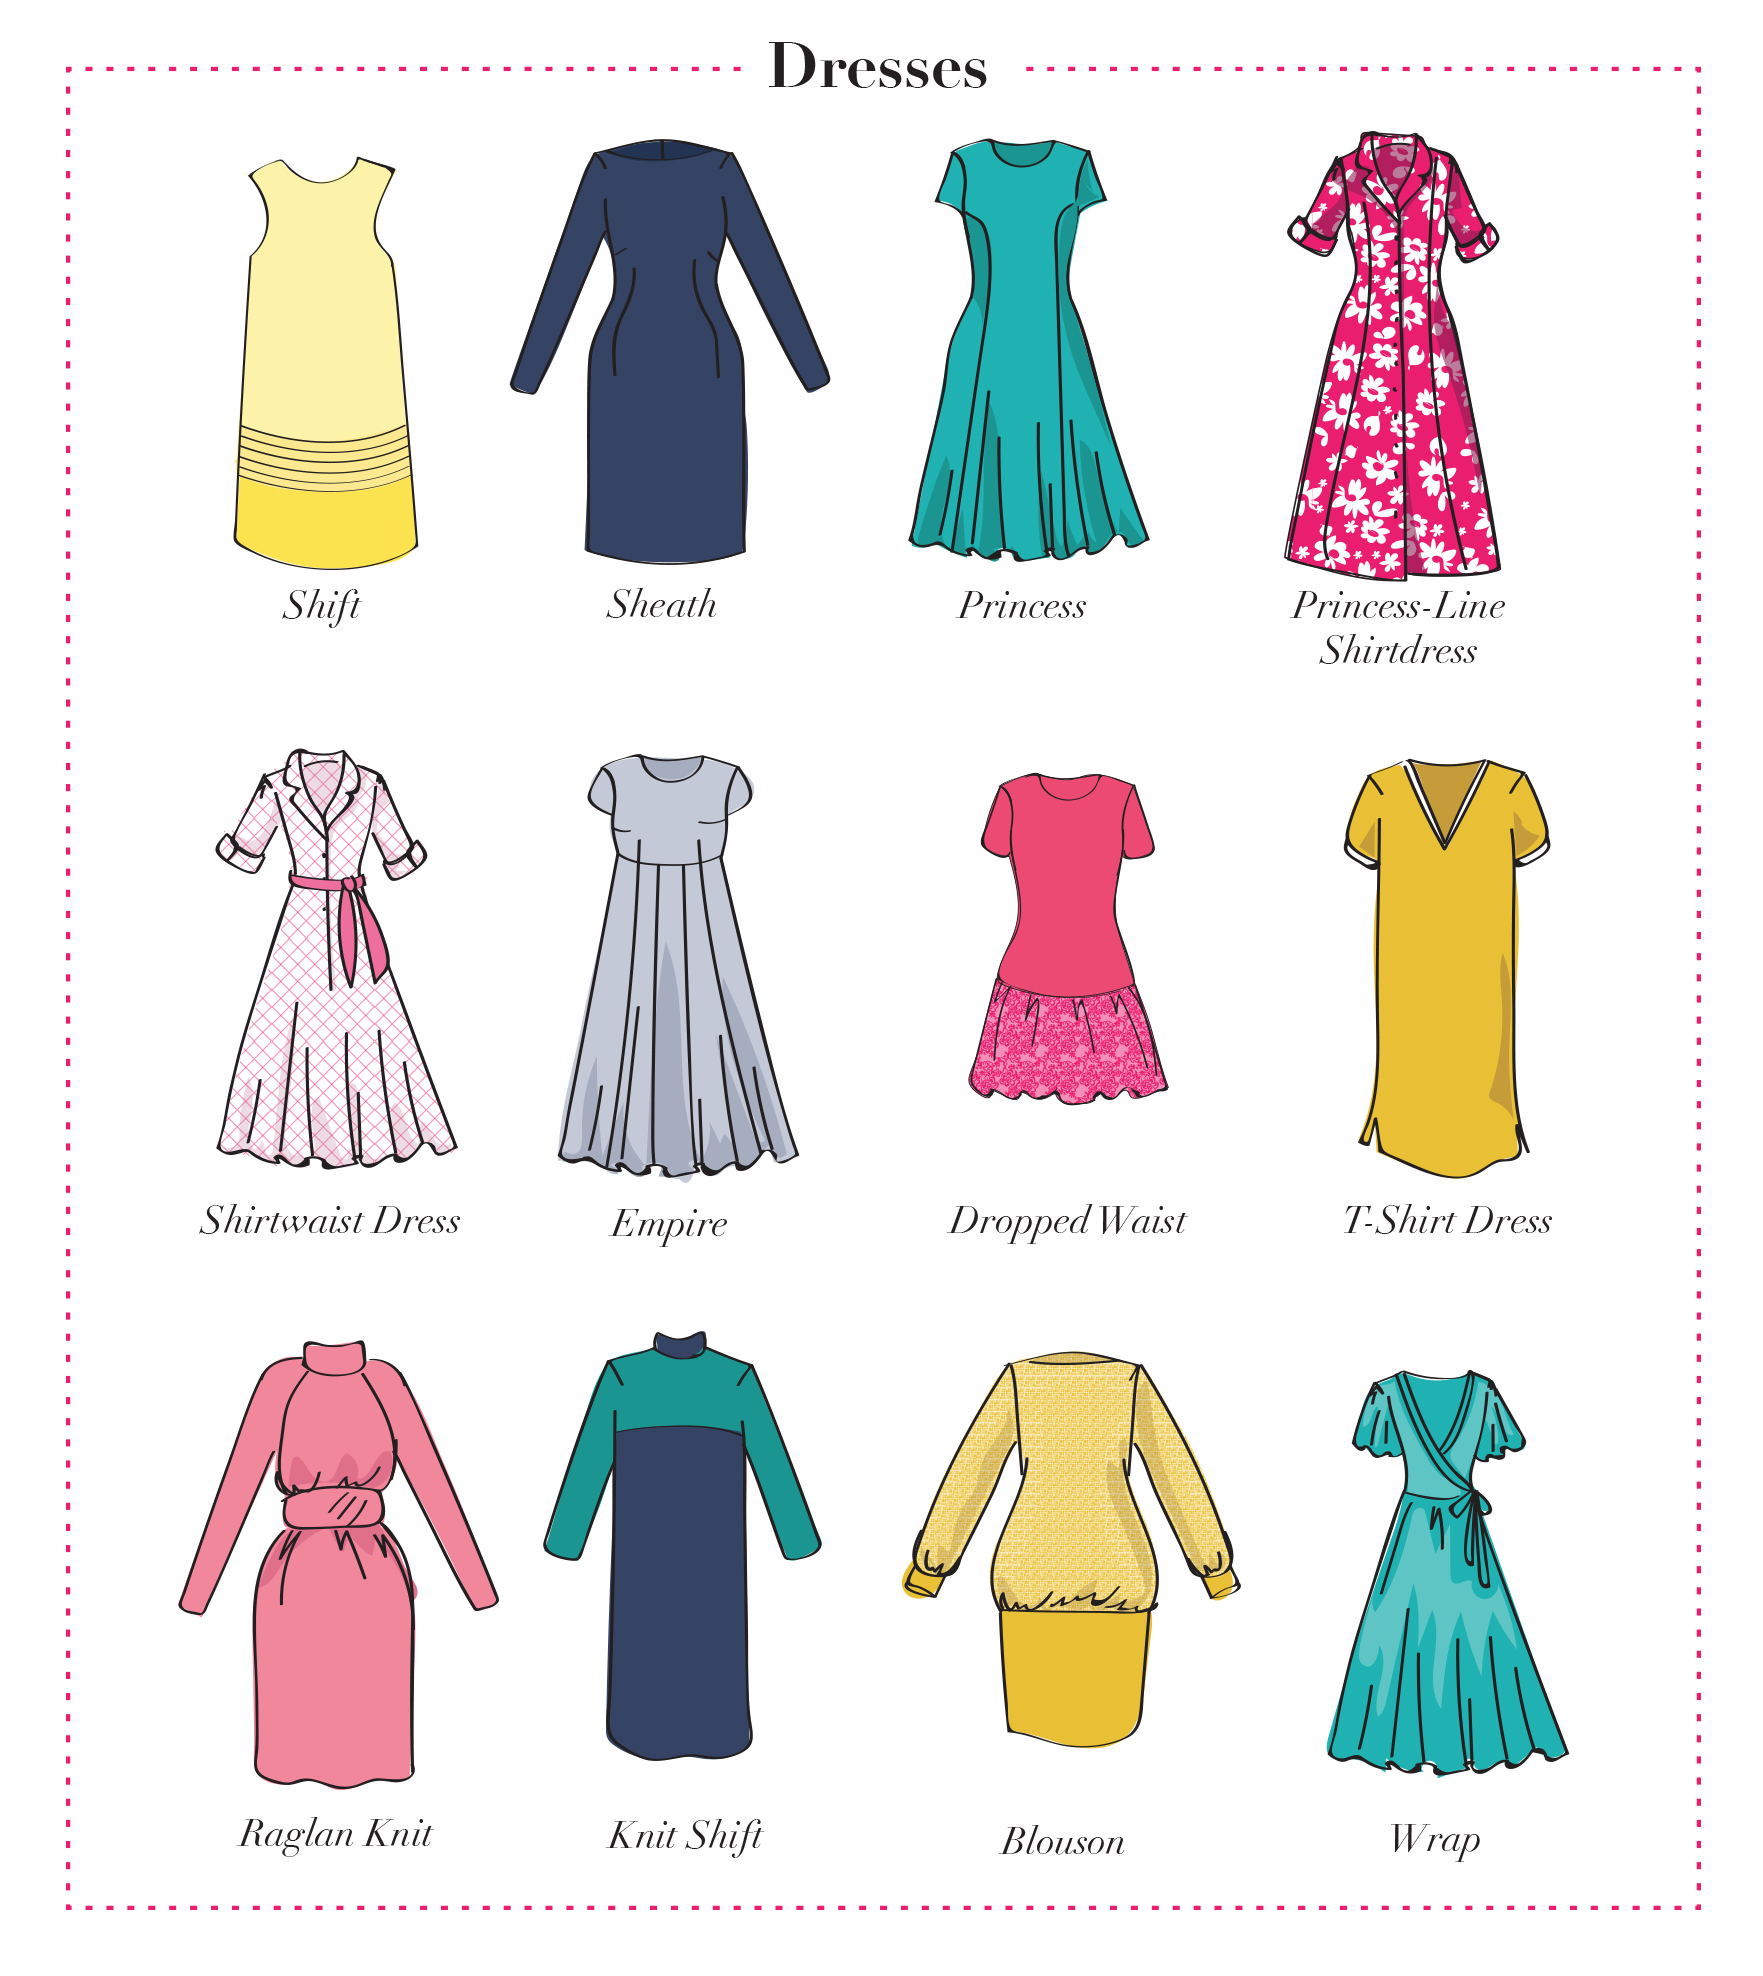 clothing > women's clothing > examples of dresses image - Visual Dictionary